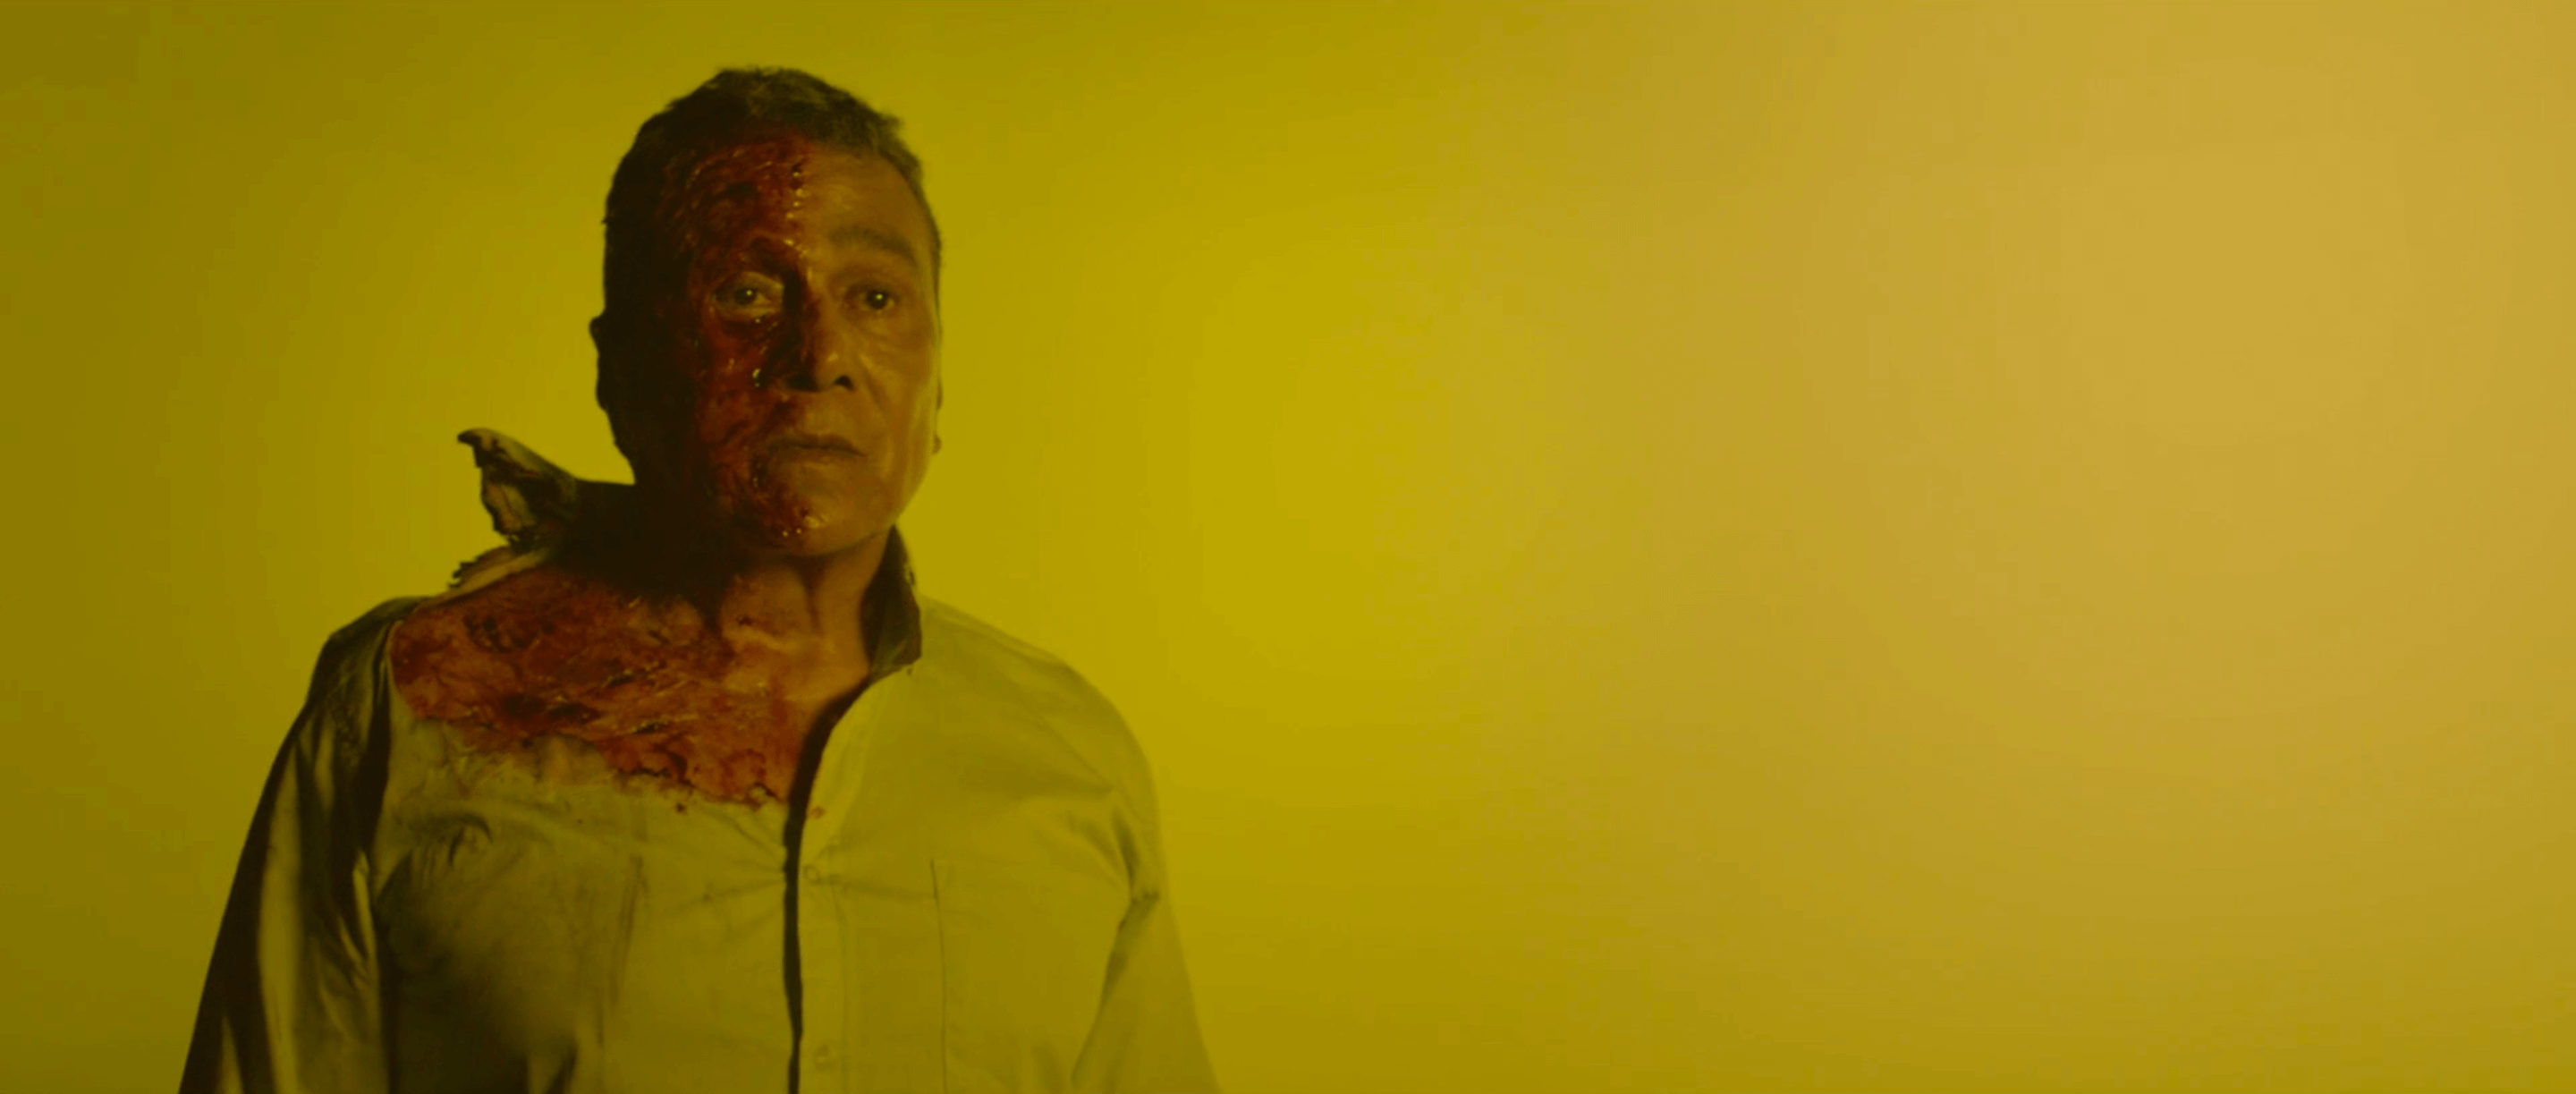 Still from #Mickey. An injured man is staring straight ahead. The right side of his face, neck, and shoulder/chest is burned. The background is a chartreuse color.